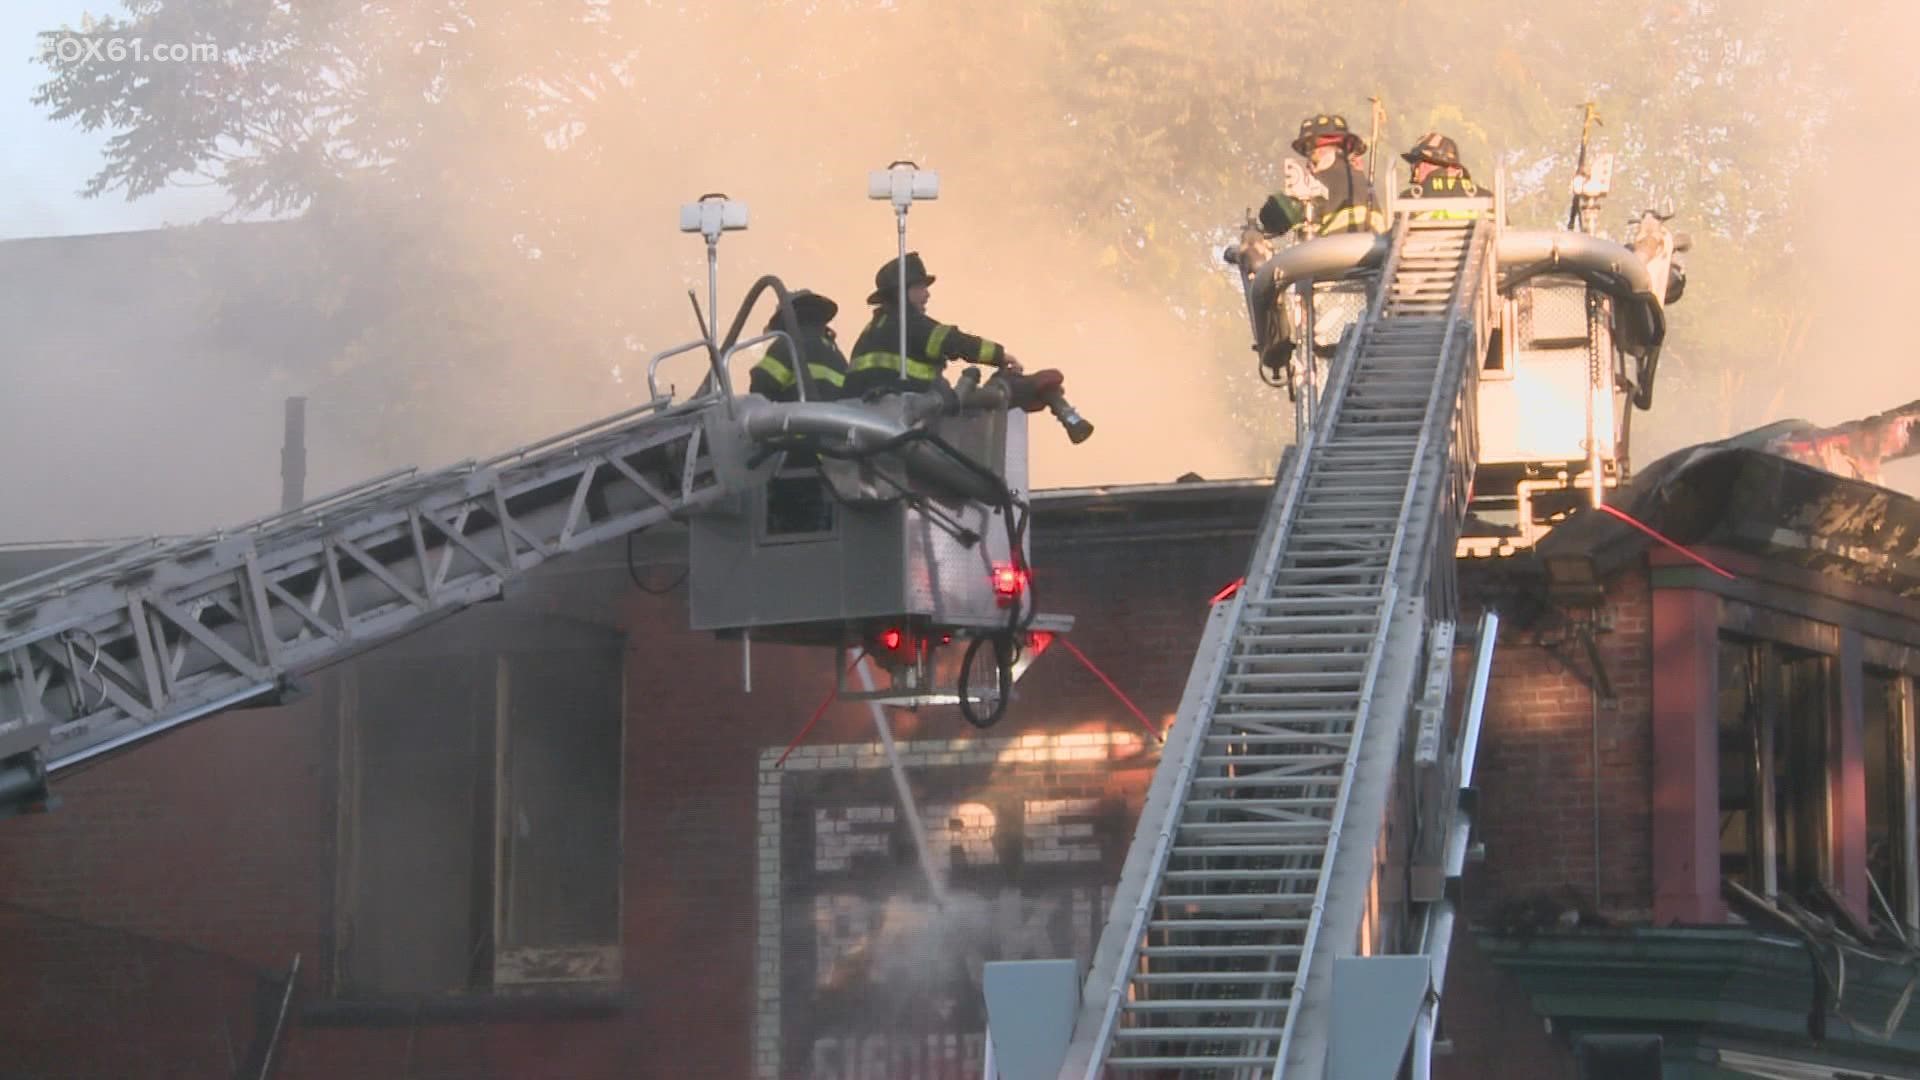 Hartford firefighters recieved the call around 4 a.m., but arrived to the scene around minutes.